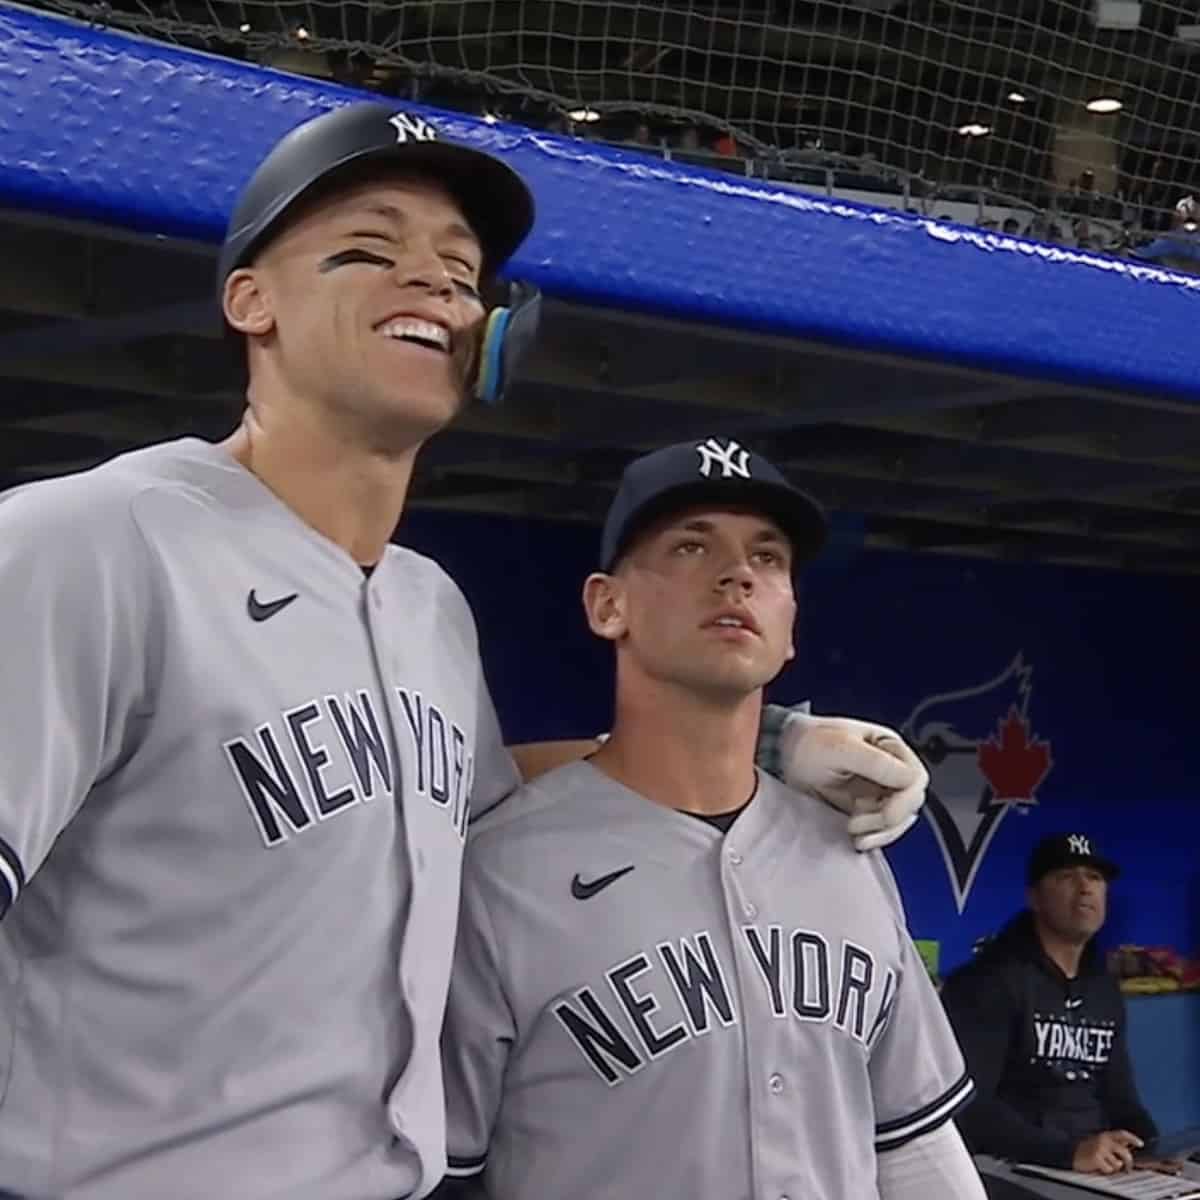 Gary Sanchez Changing His Catching Stance Should Excite Yankees Fans